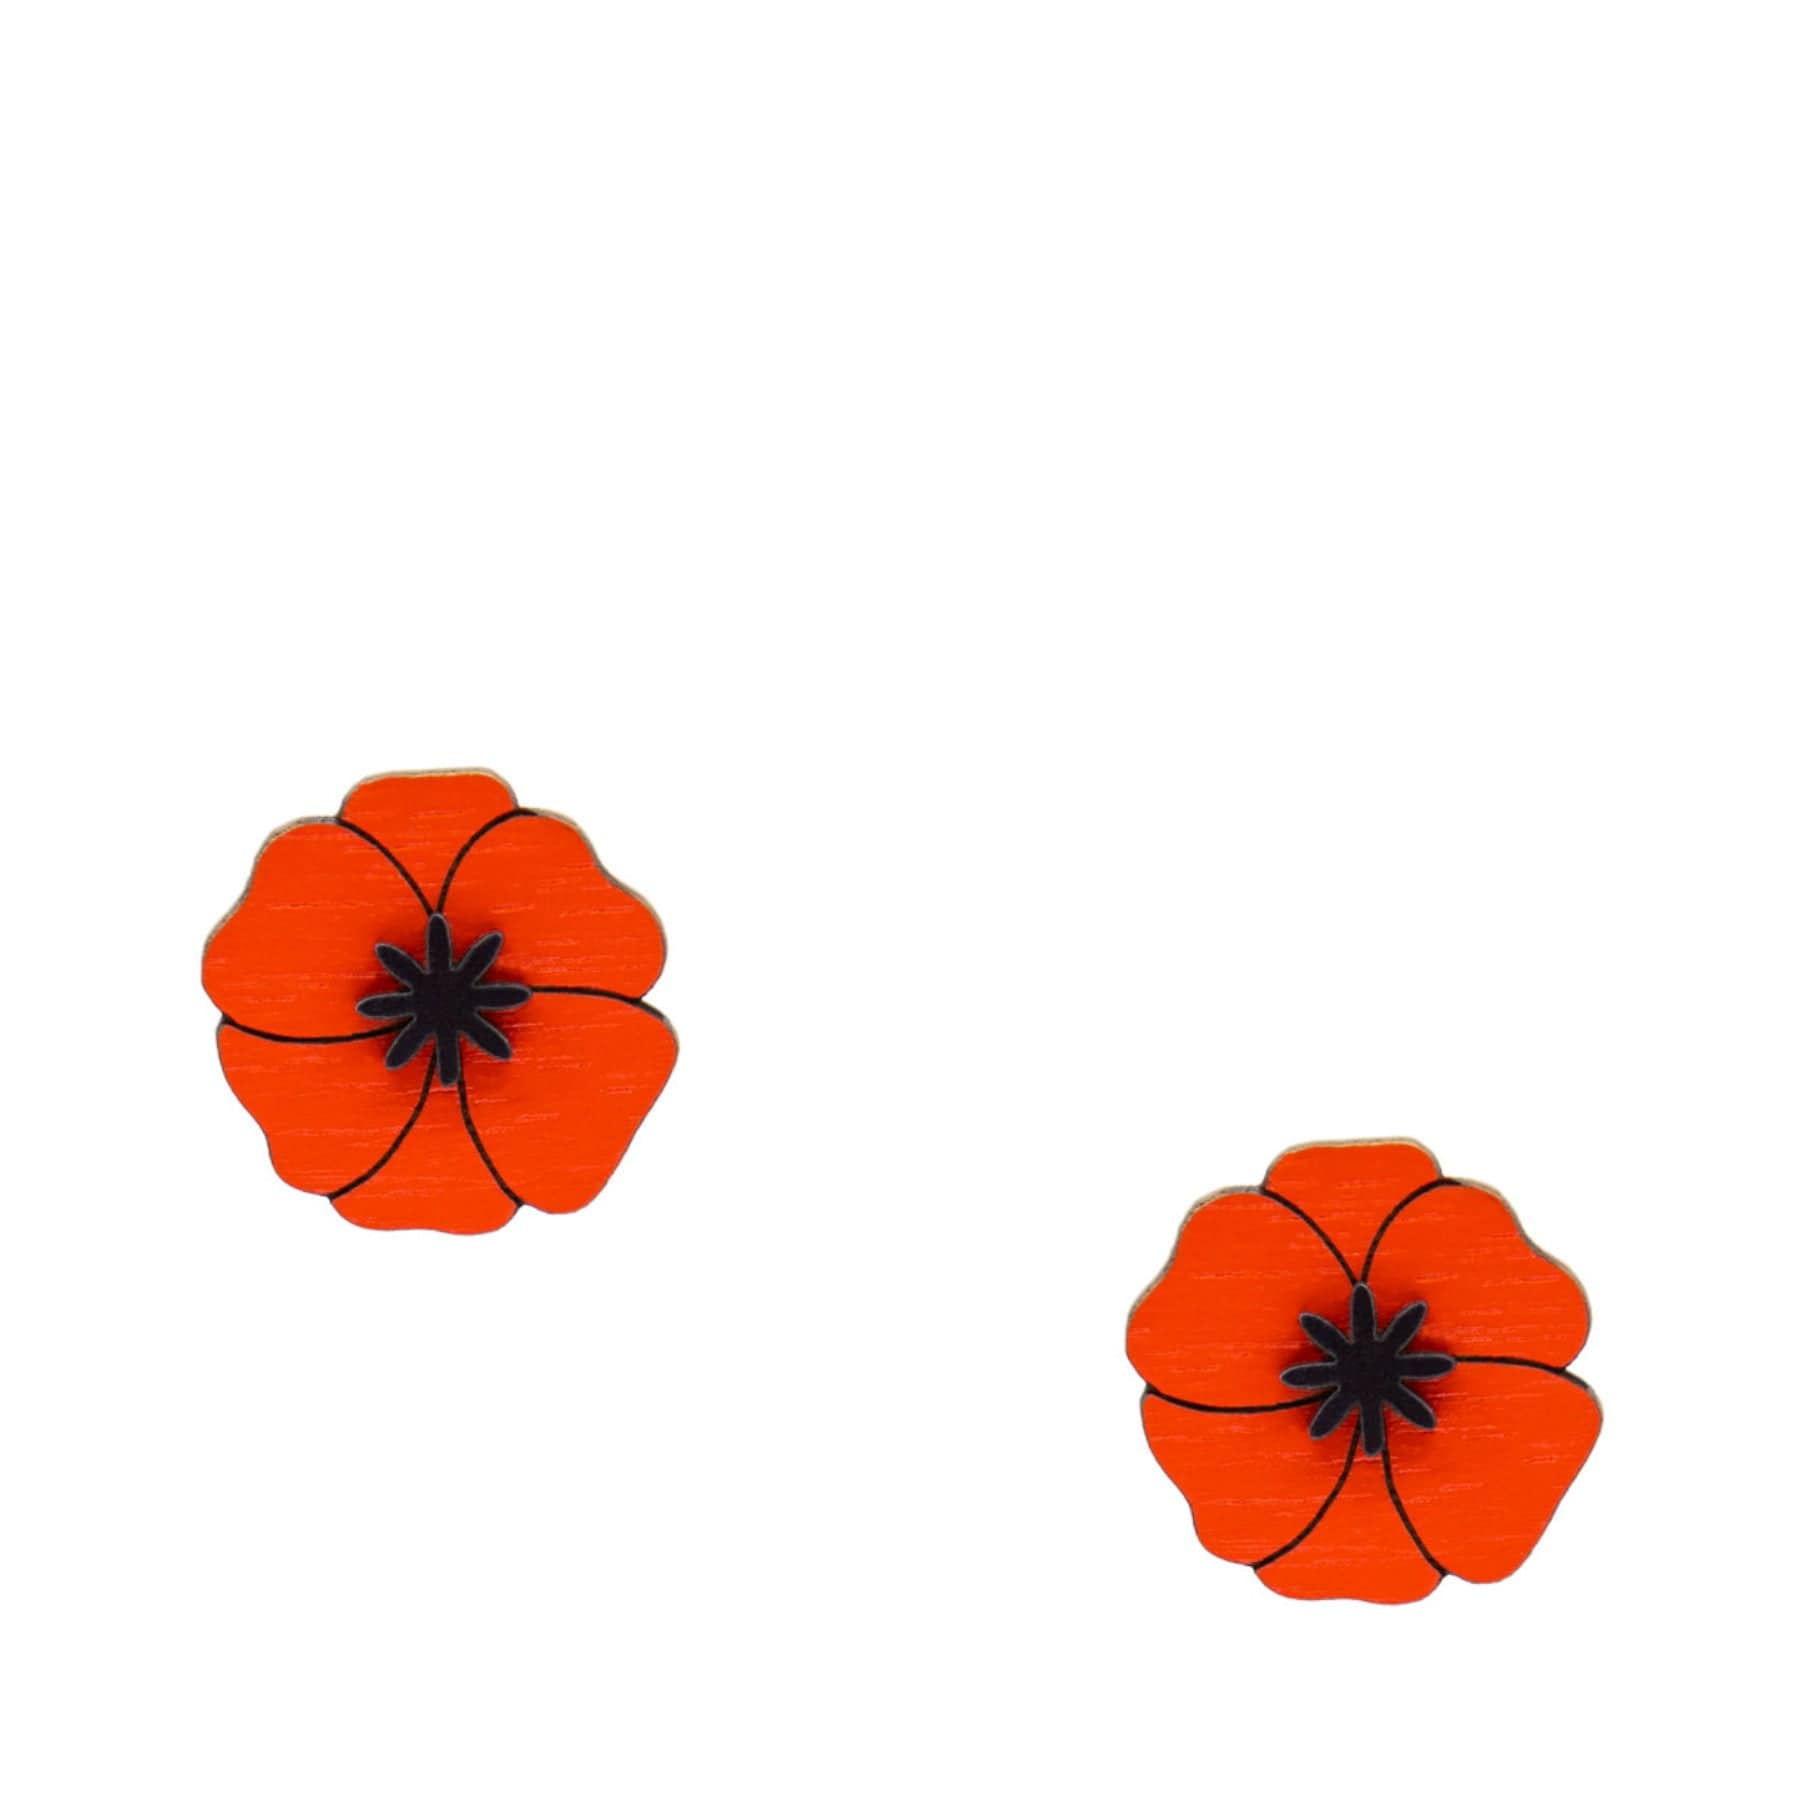 Two red poppy flowers with black centers on a white background, floral design, remembrance symbol, isolated poppies.